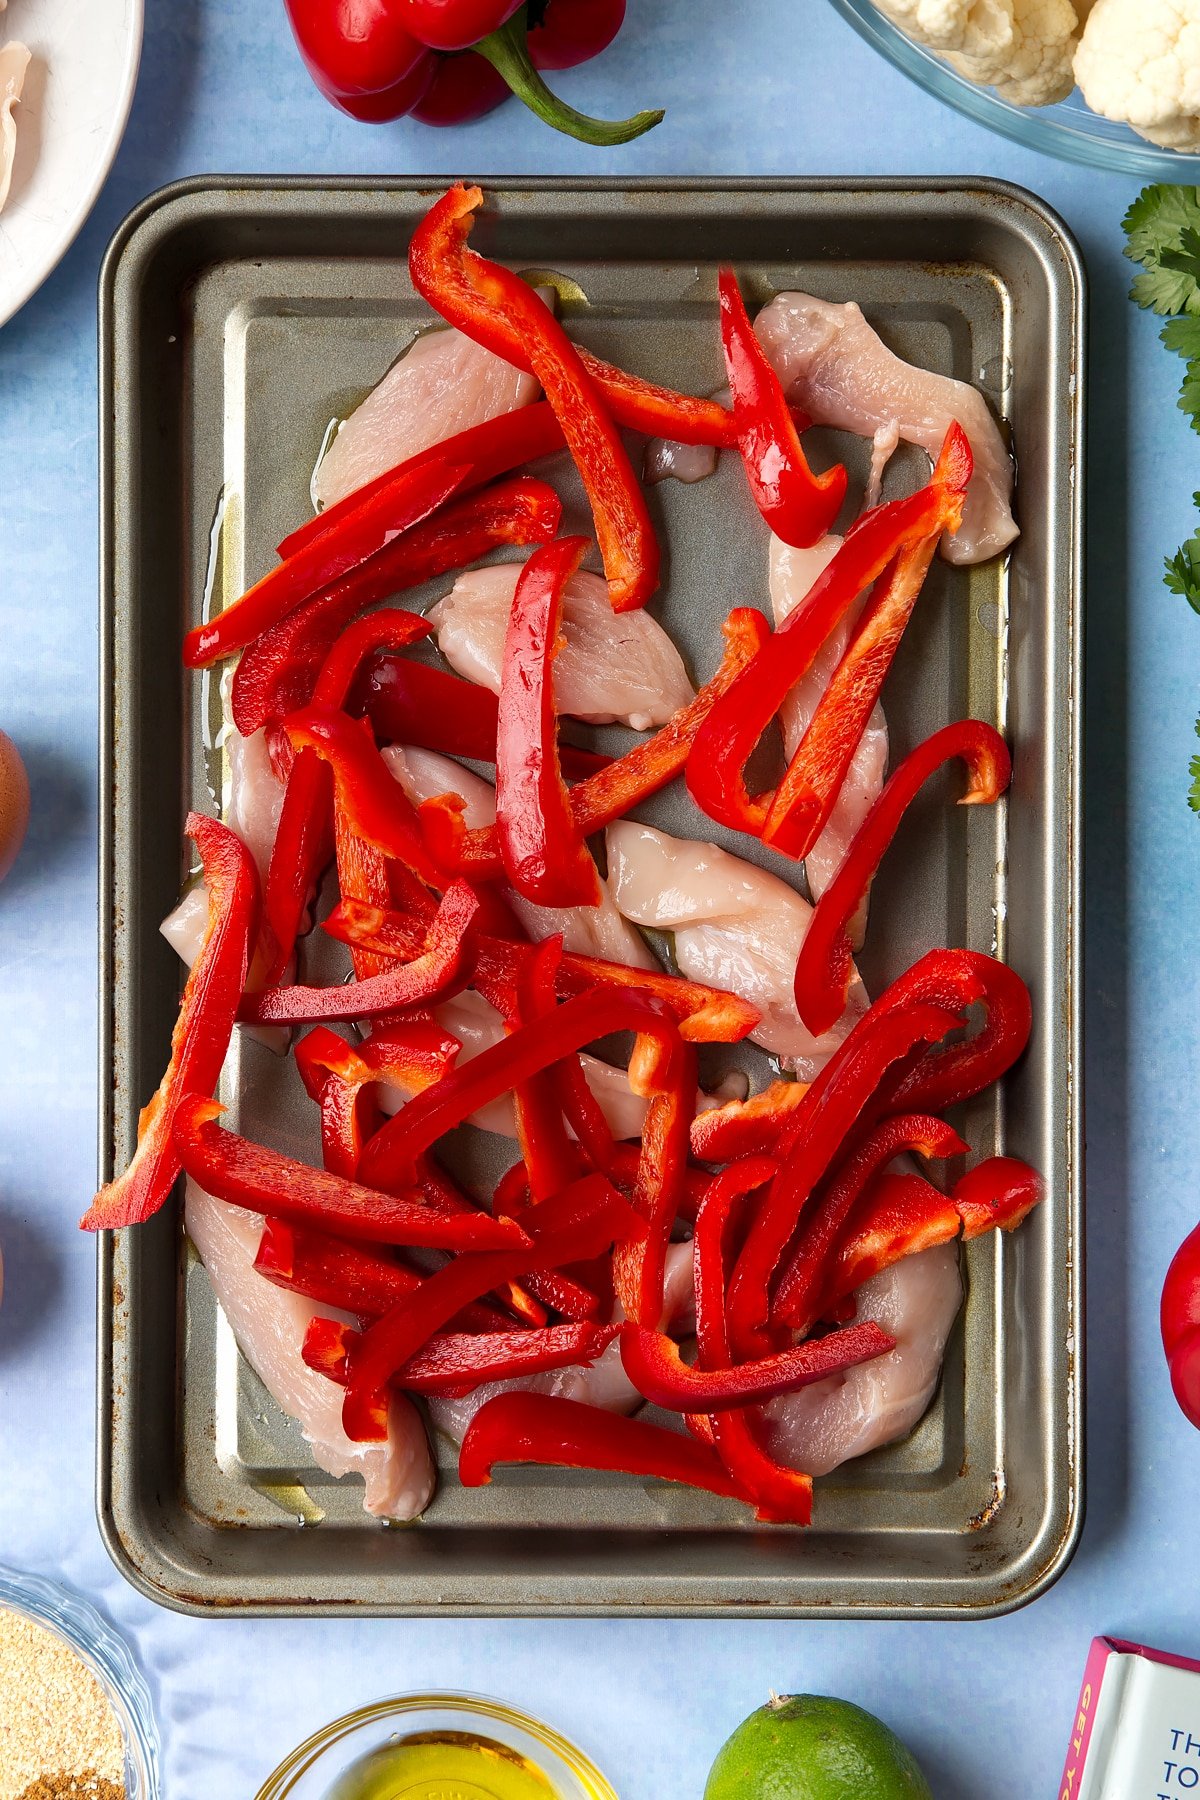 Sliced chicken breast and sliced red peppers on an oiled tray. The tray is surrounded by ingredients for cauliflower tacos. 